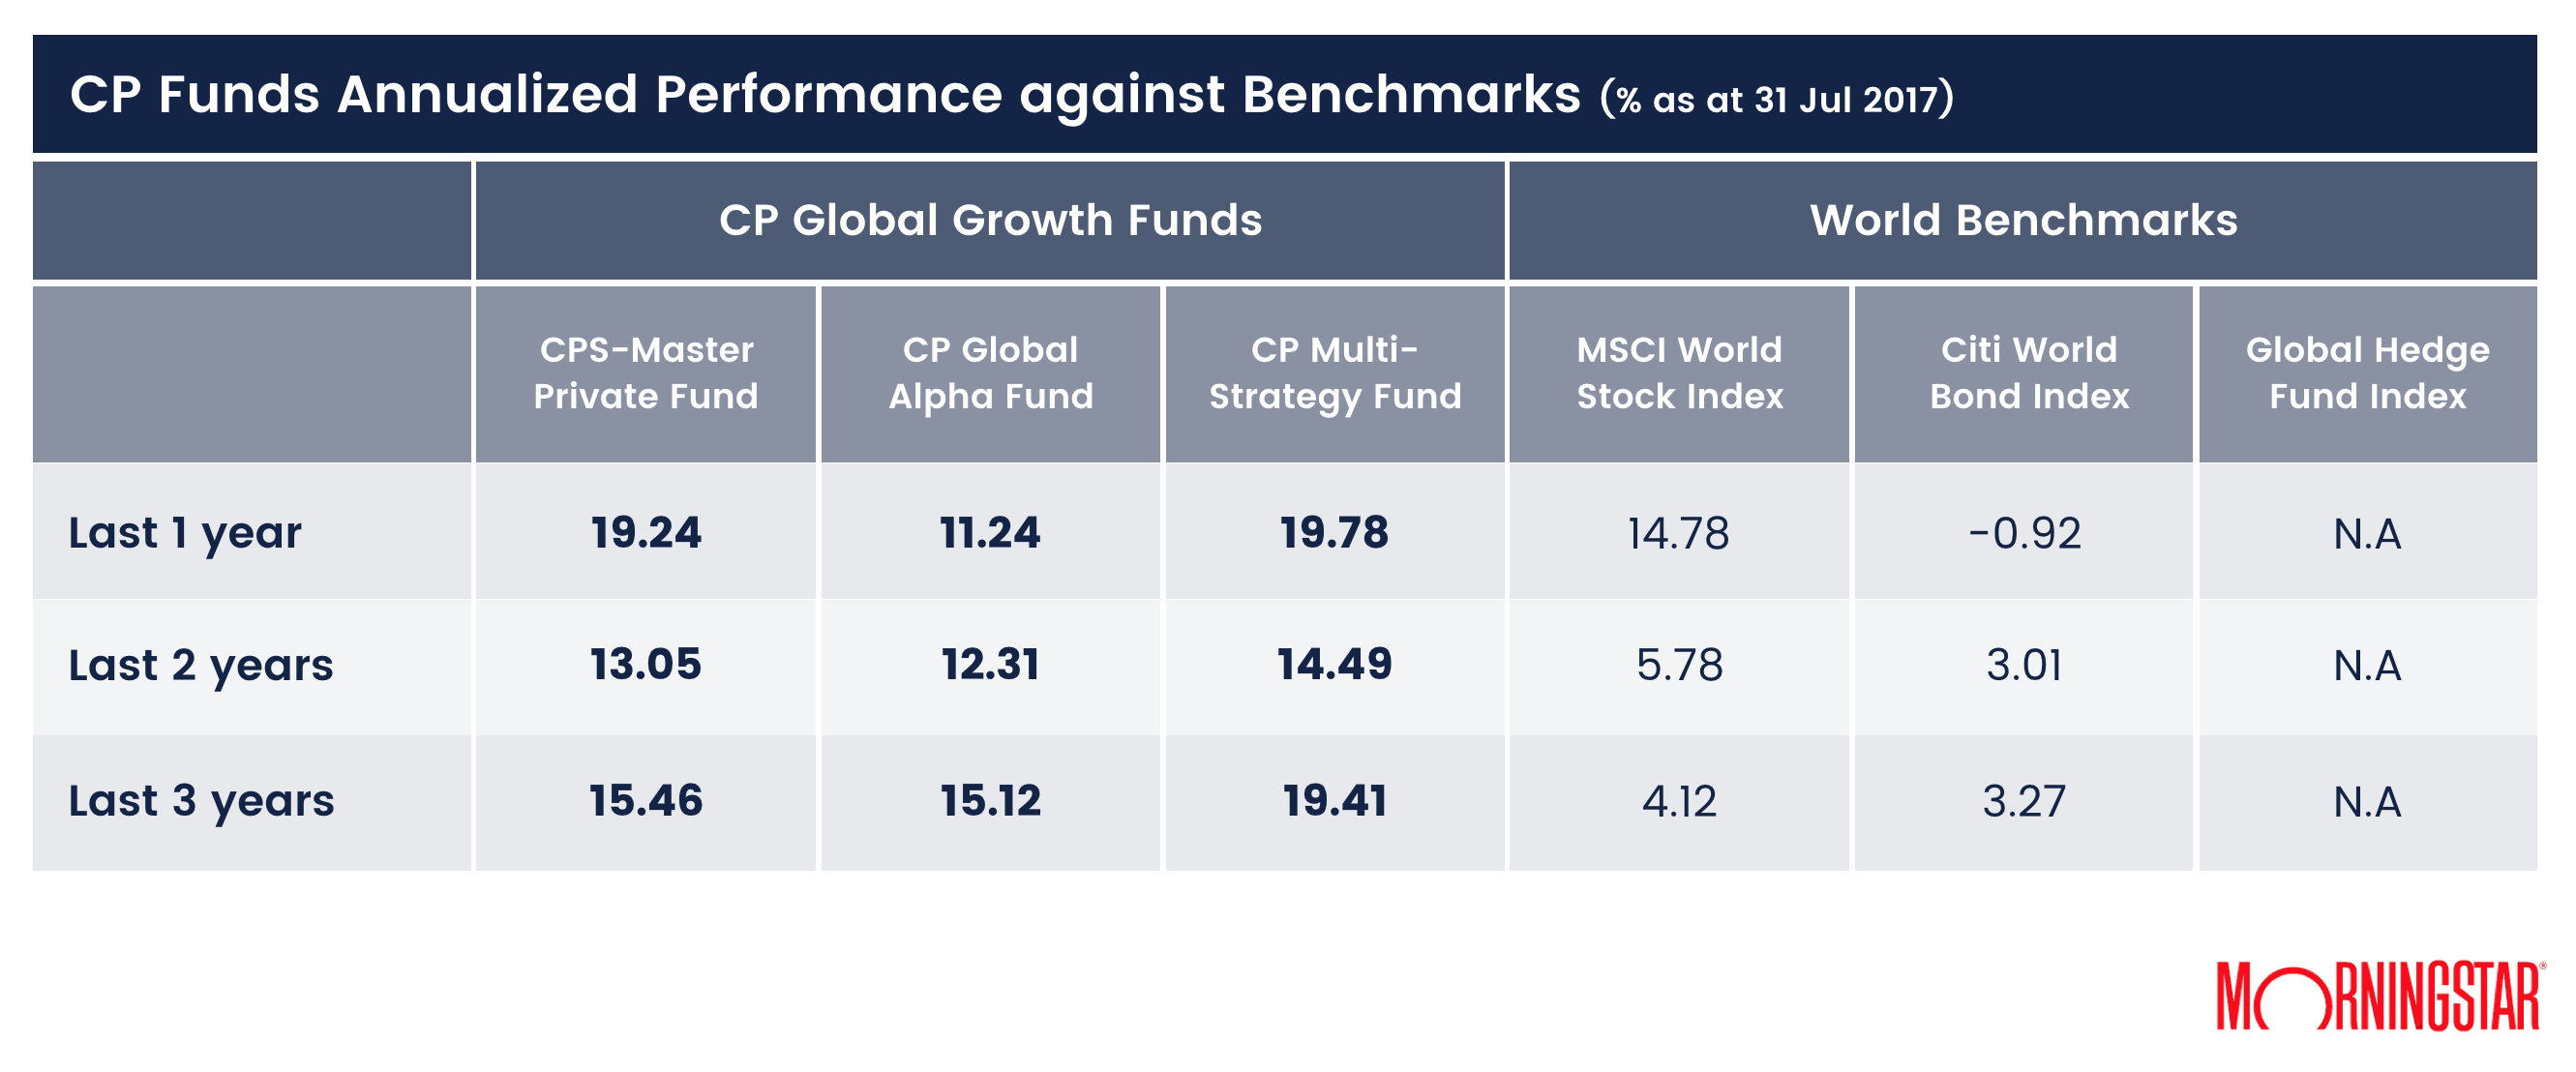 cp-global-funds-annualized-performance-against-benchmarks-31jul2017